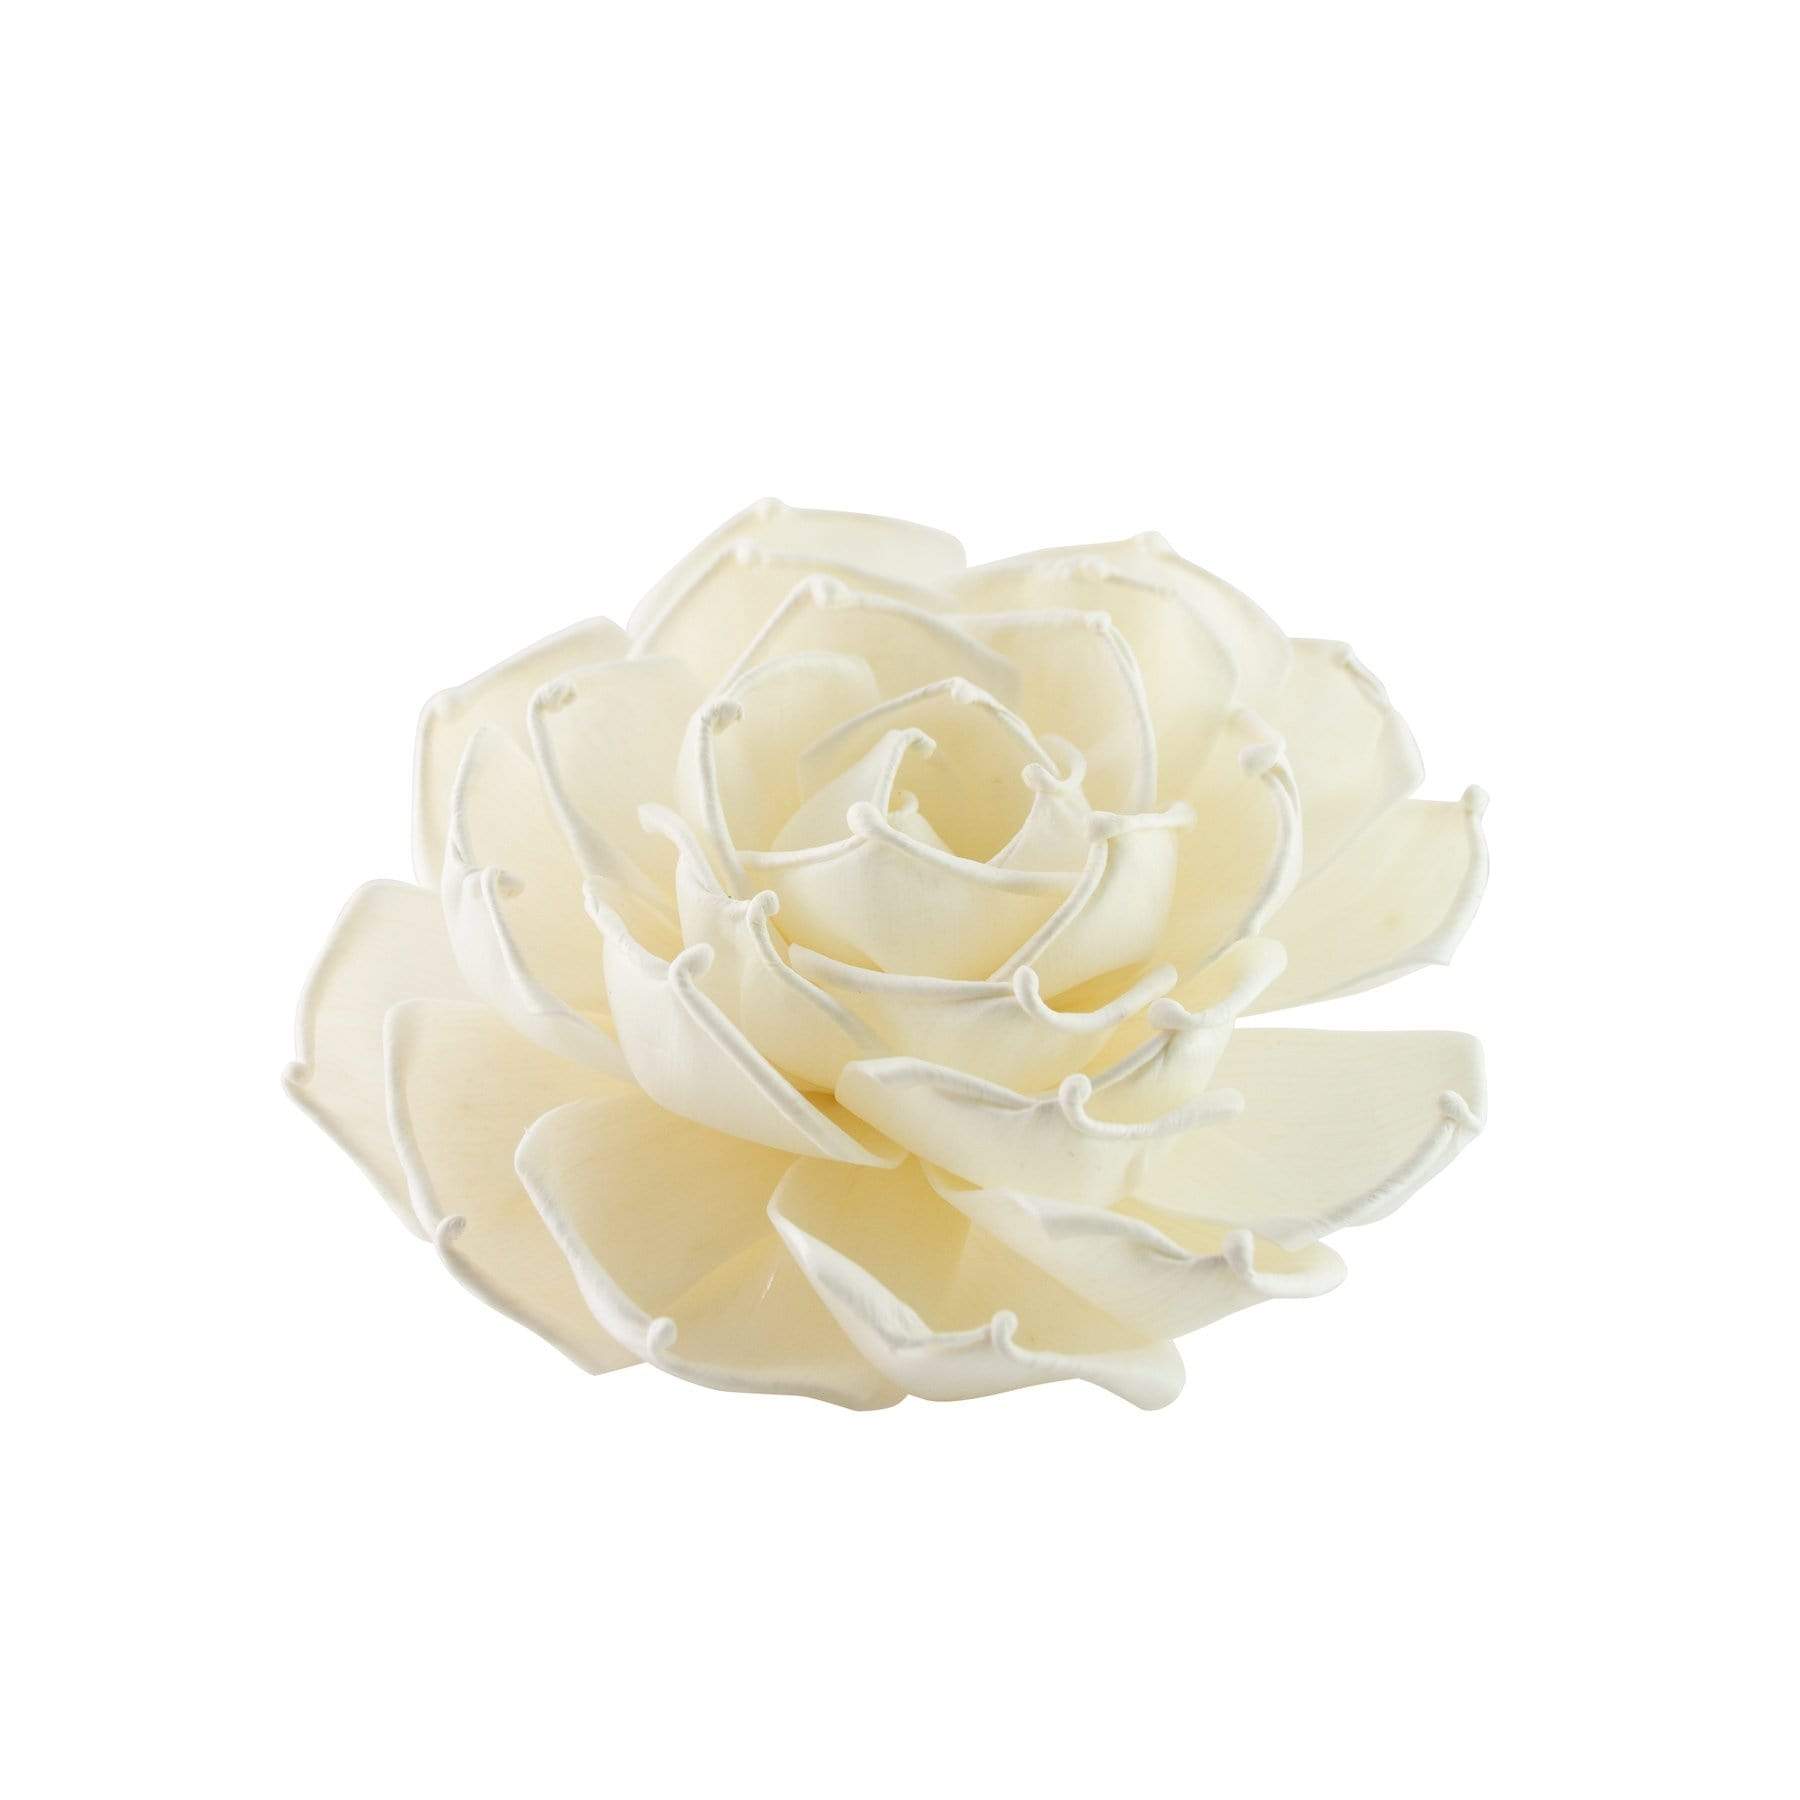 HYSSES Home Scents 2.5" Solar Flower Diffuser Refill - Rose 2.5"